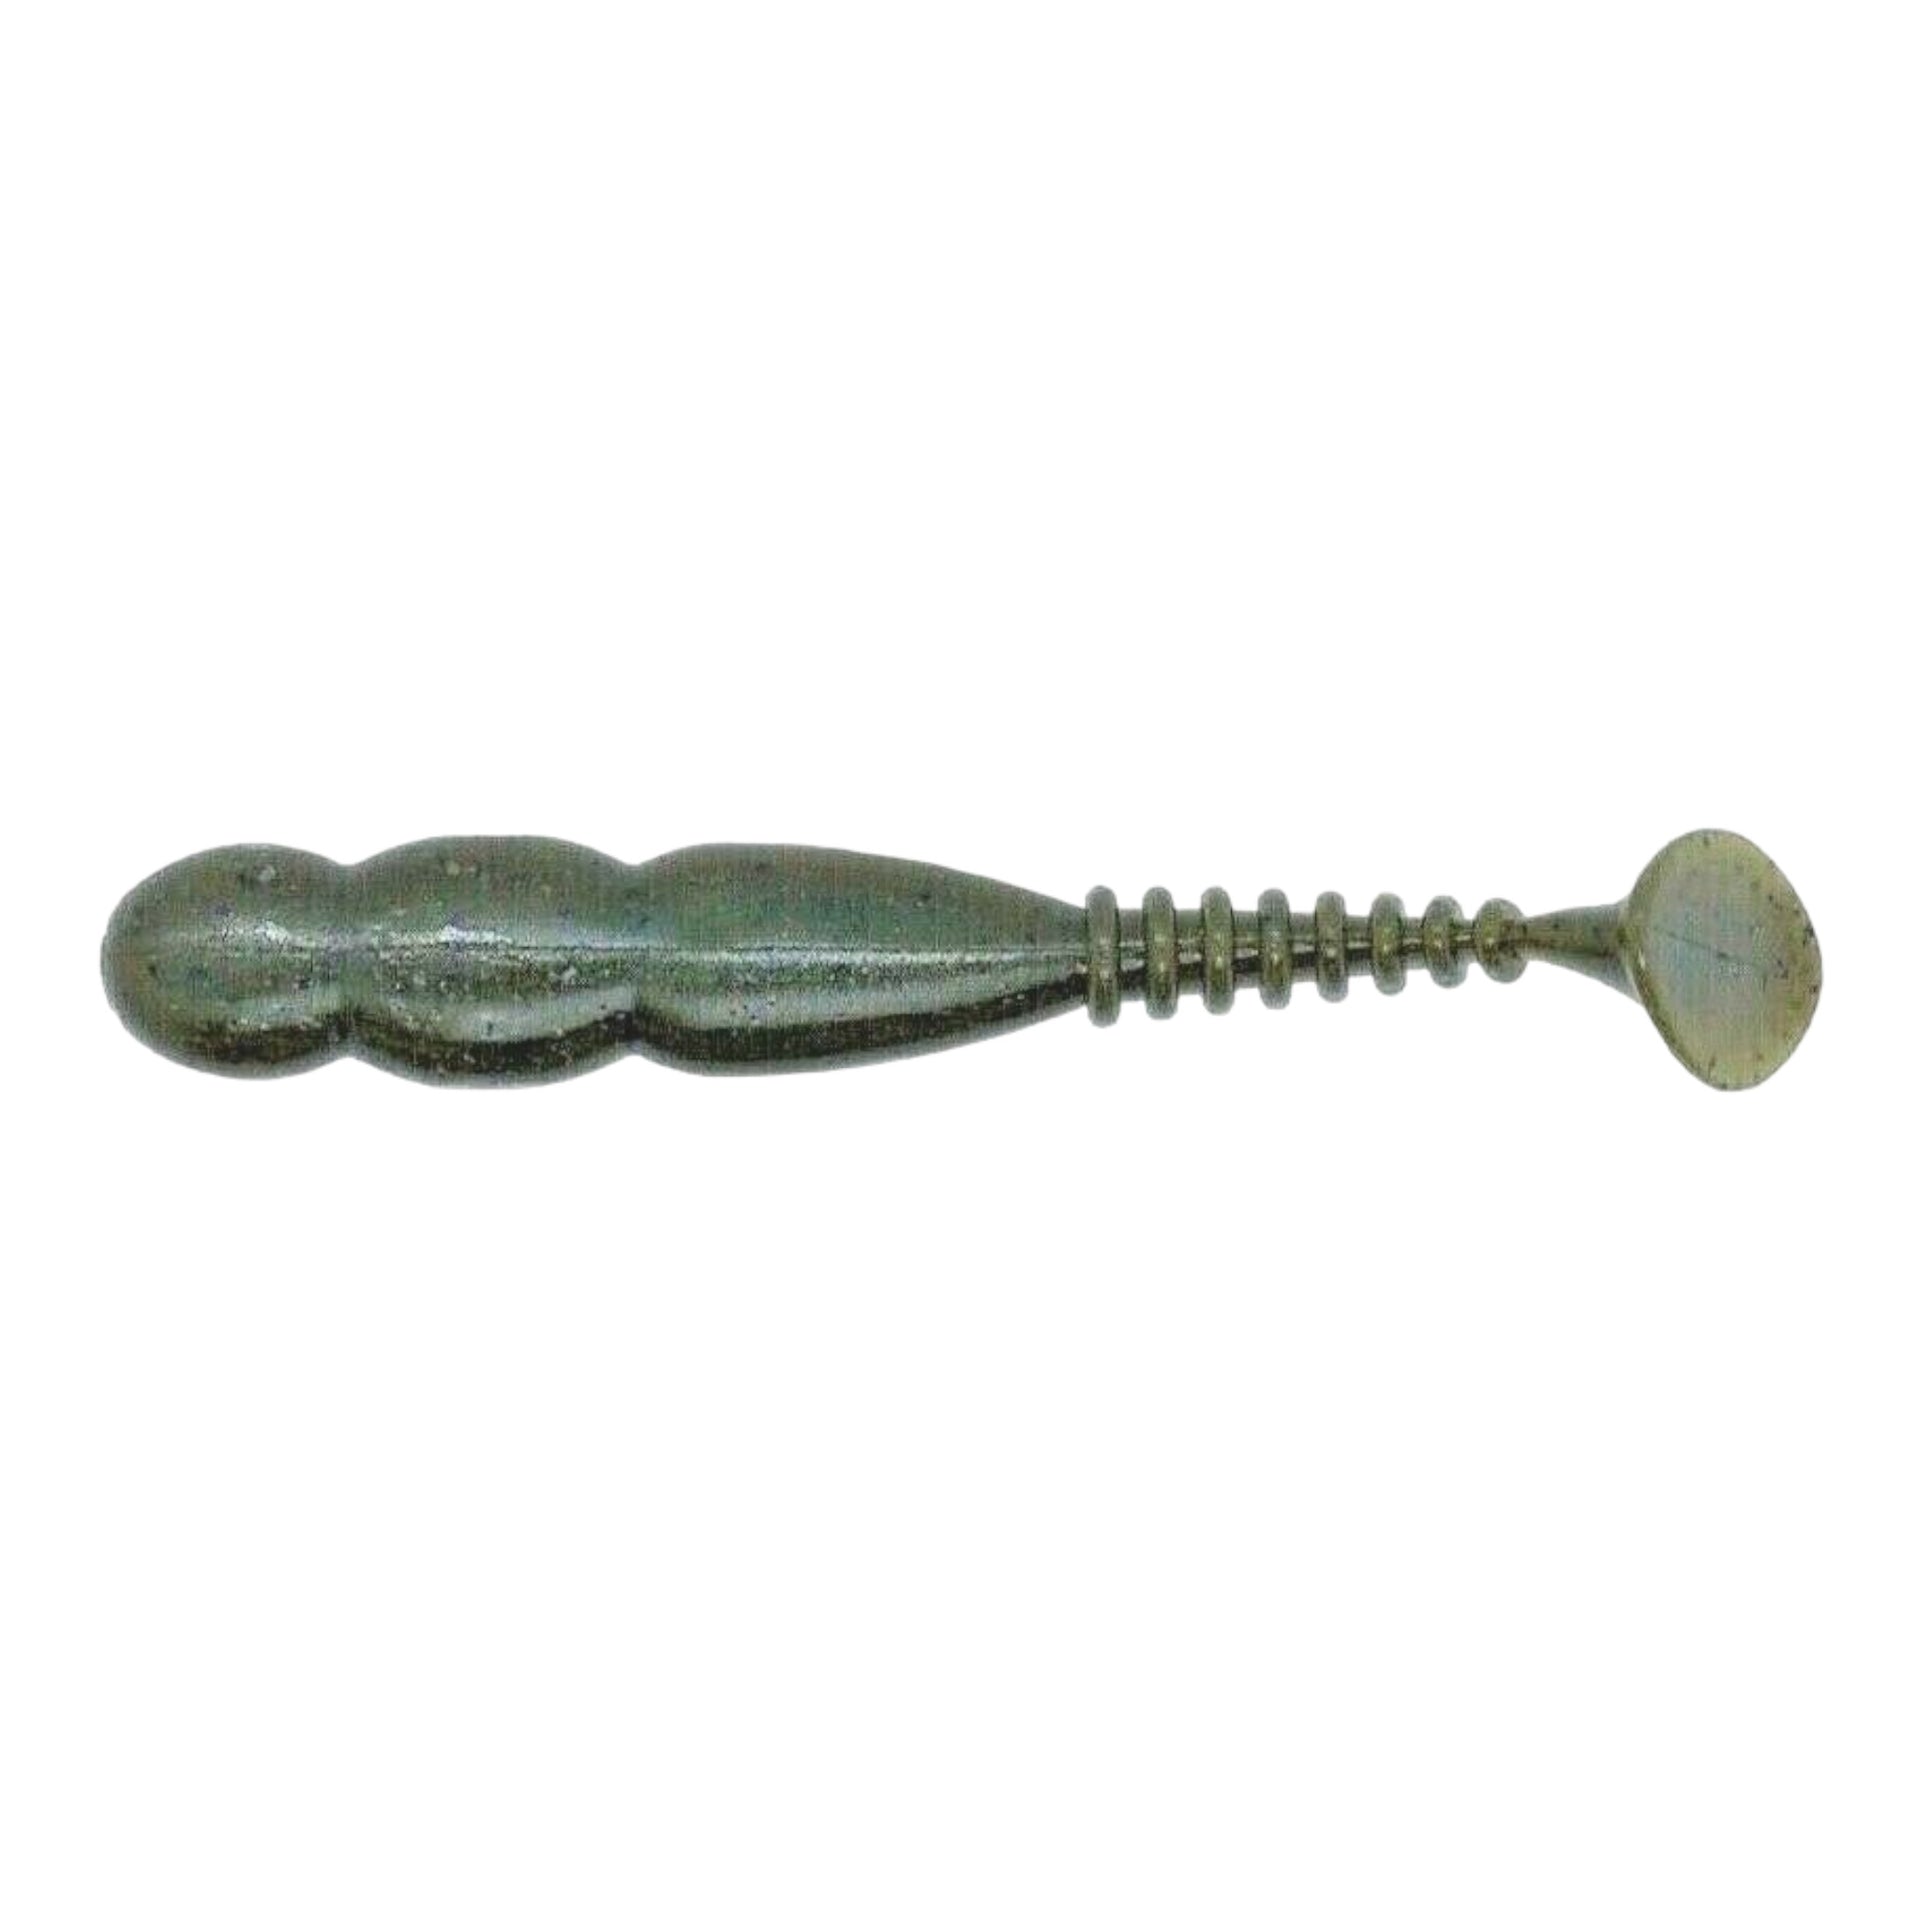 The Reins Fat Rockvibe Shad is an extremely durable and effective